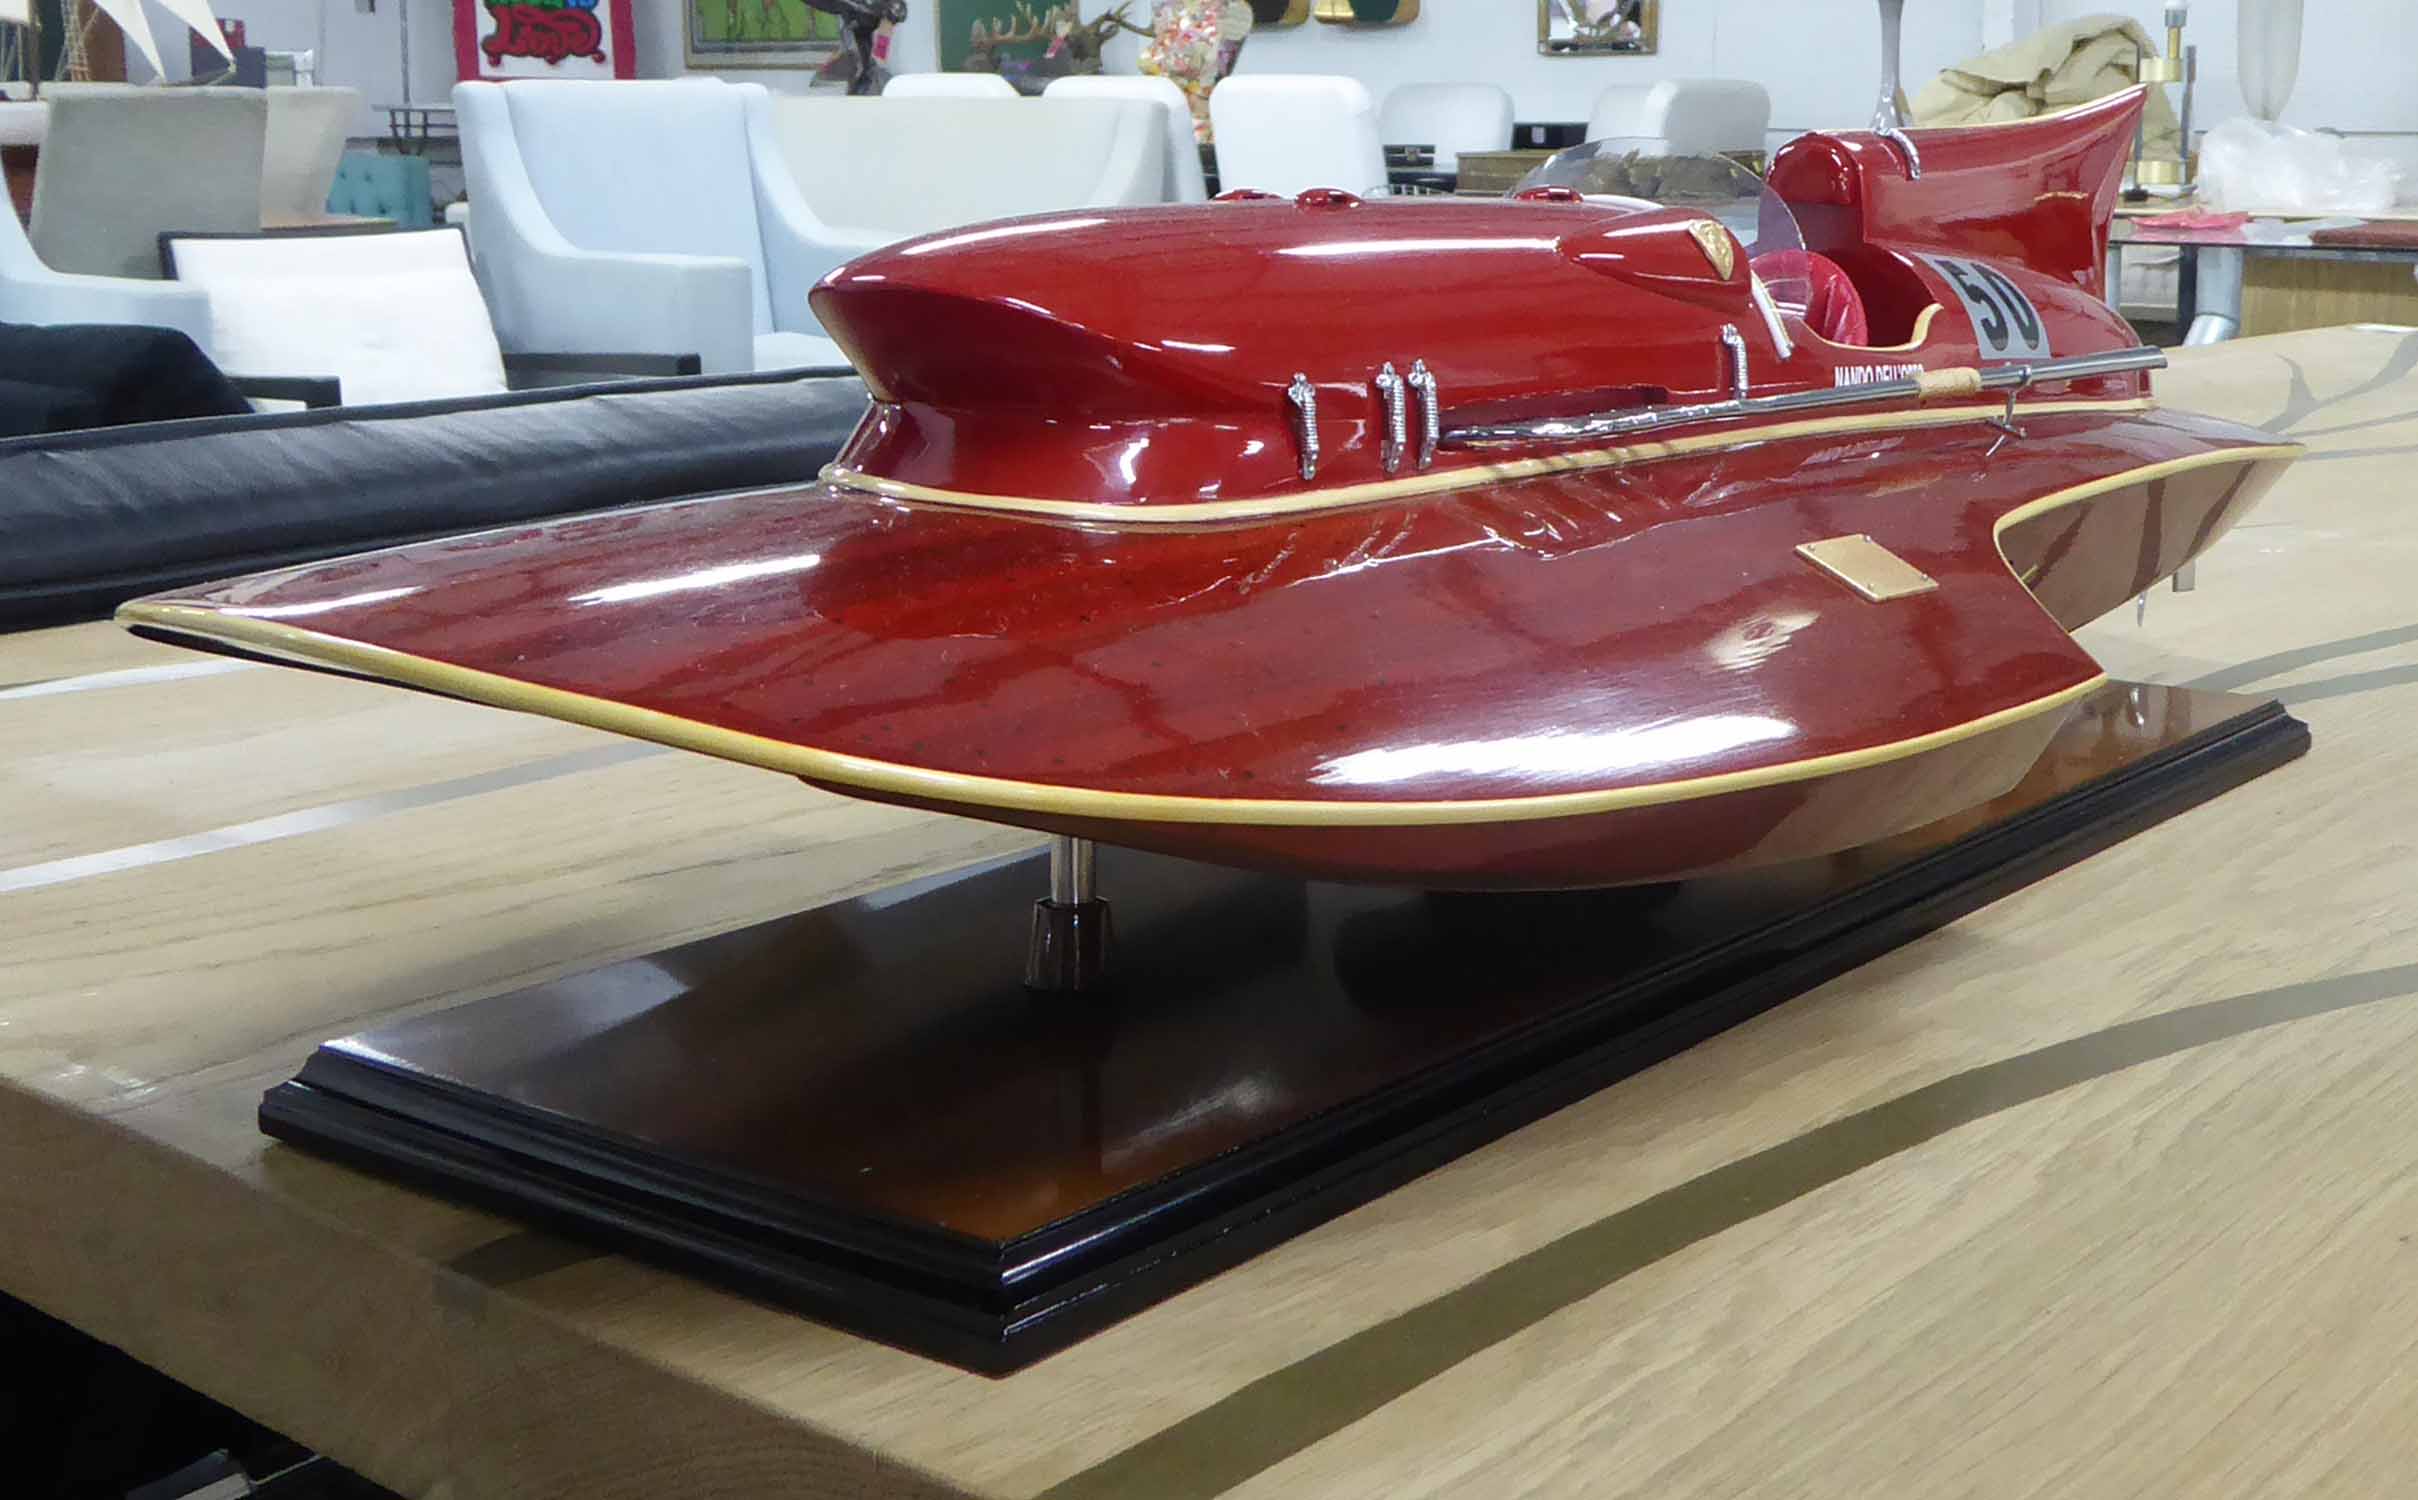 THUNDER BOLT HYDROPLANE MODEL BOAT, on stand, 80cm x 15cm x 22cm. - Image 2 of 2